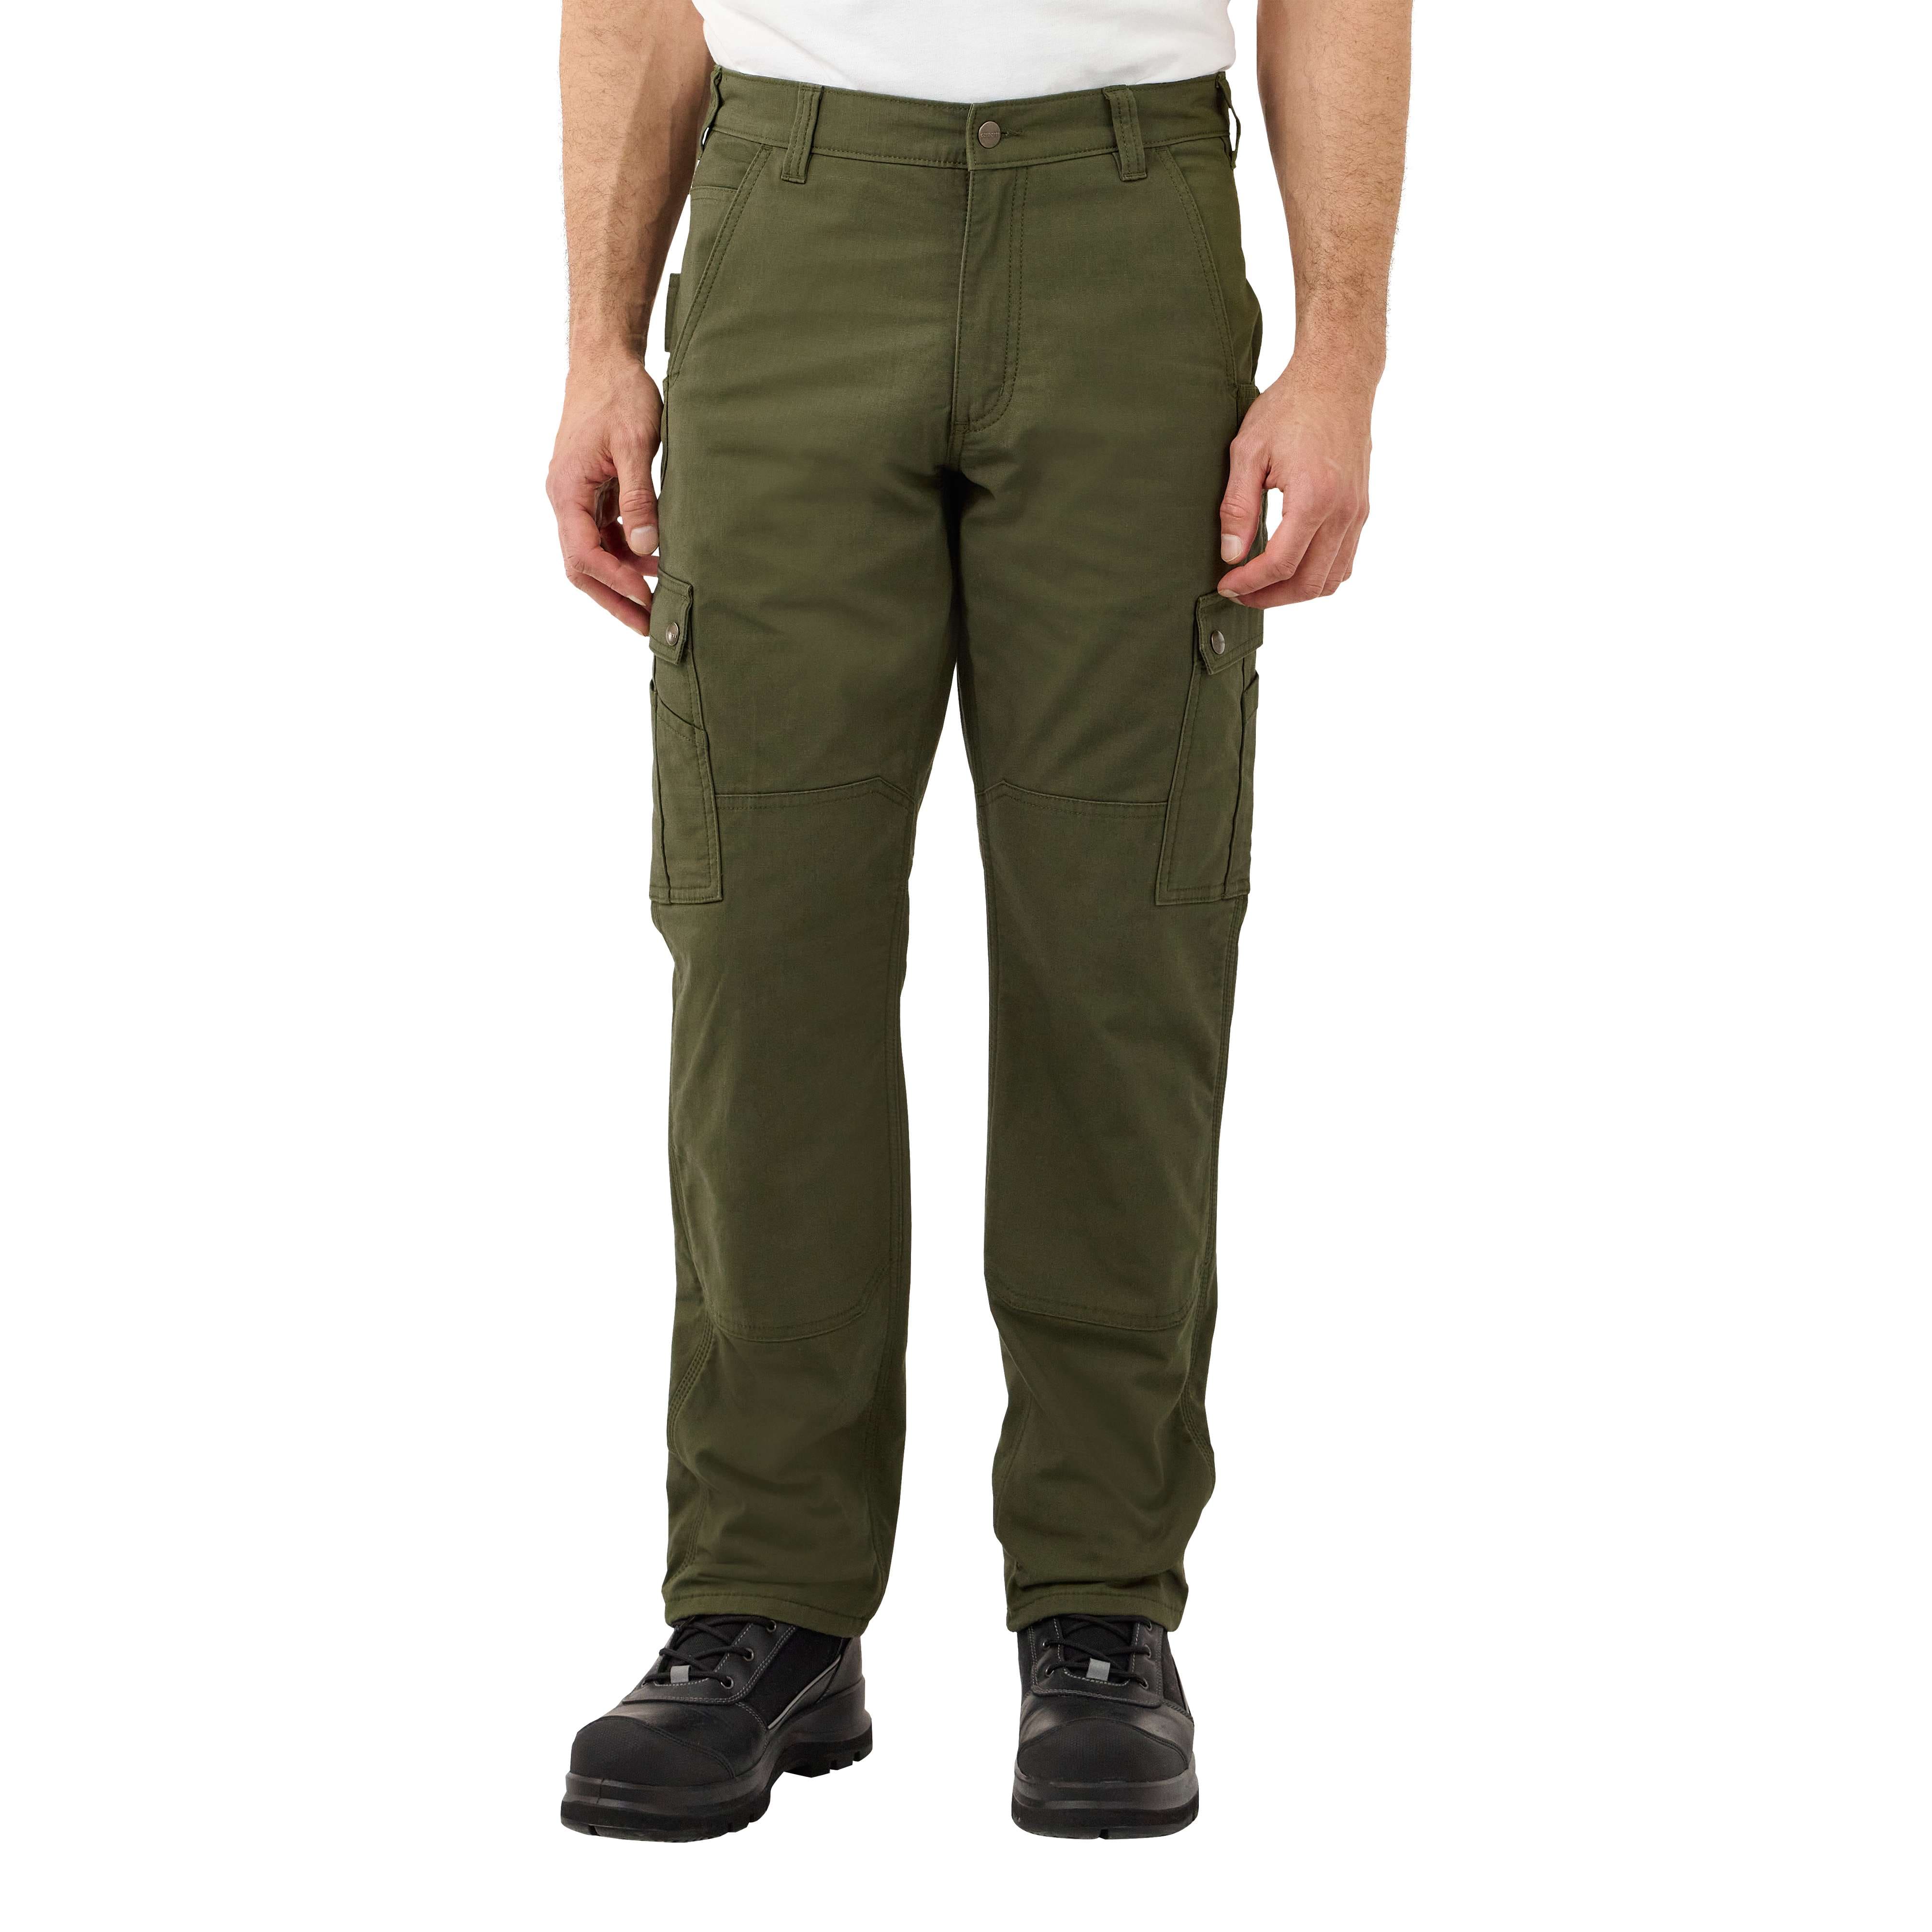 Carhartt Rugged Flex Loose Fit Canvas Double-Front Work Pant, Dark